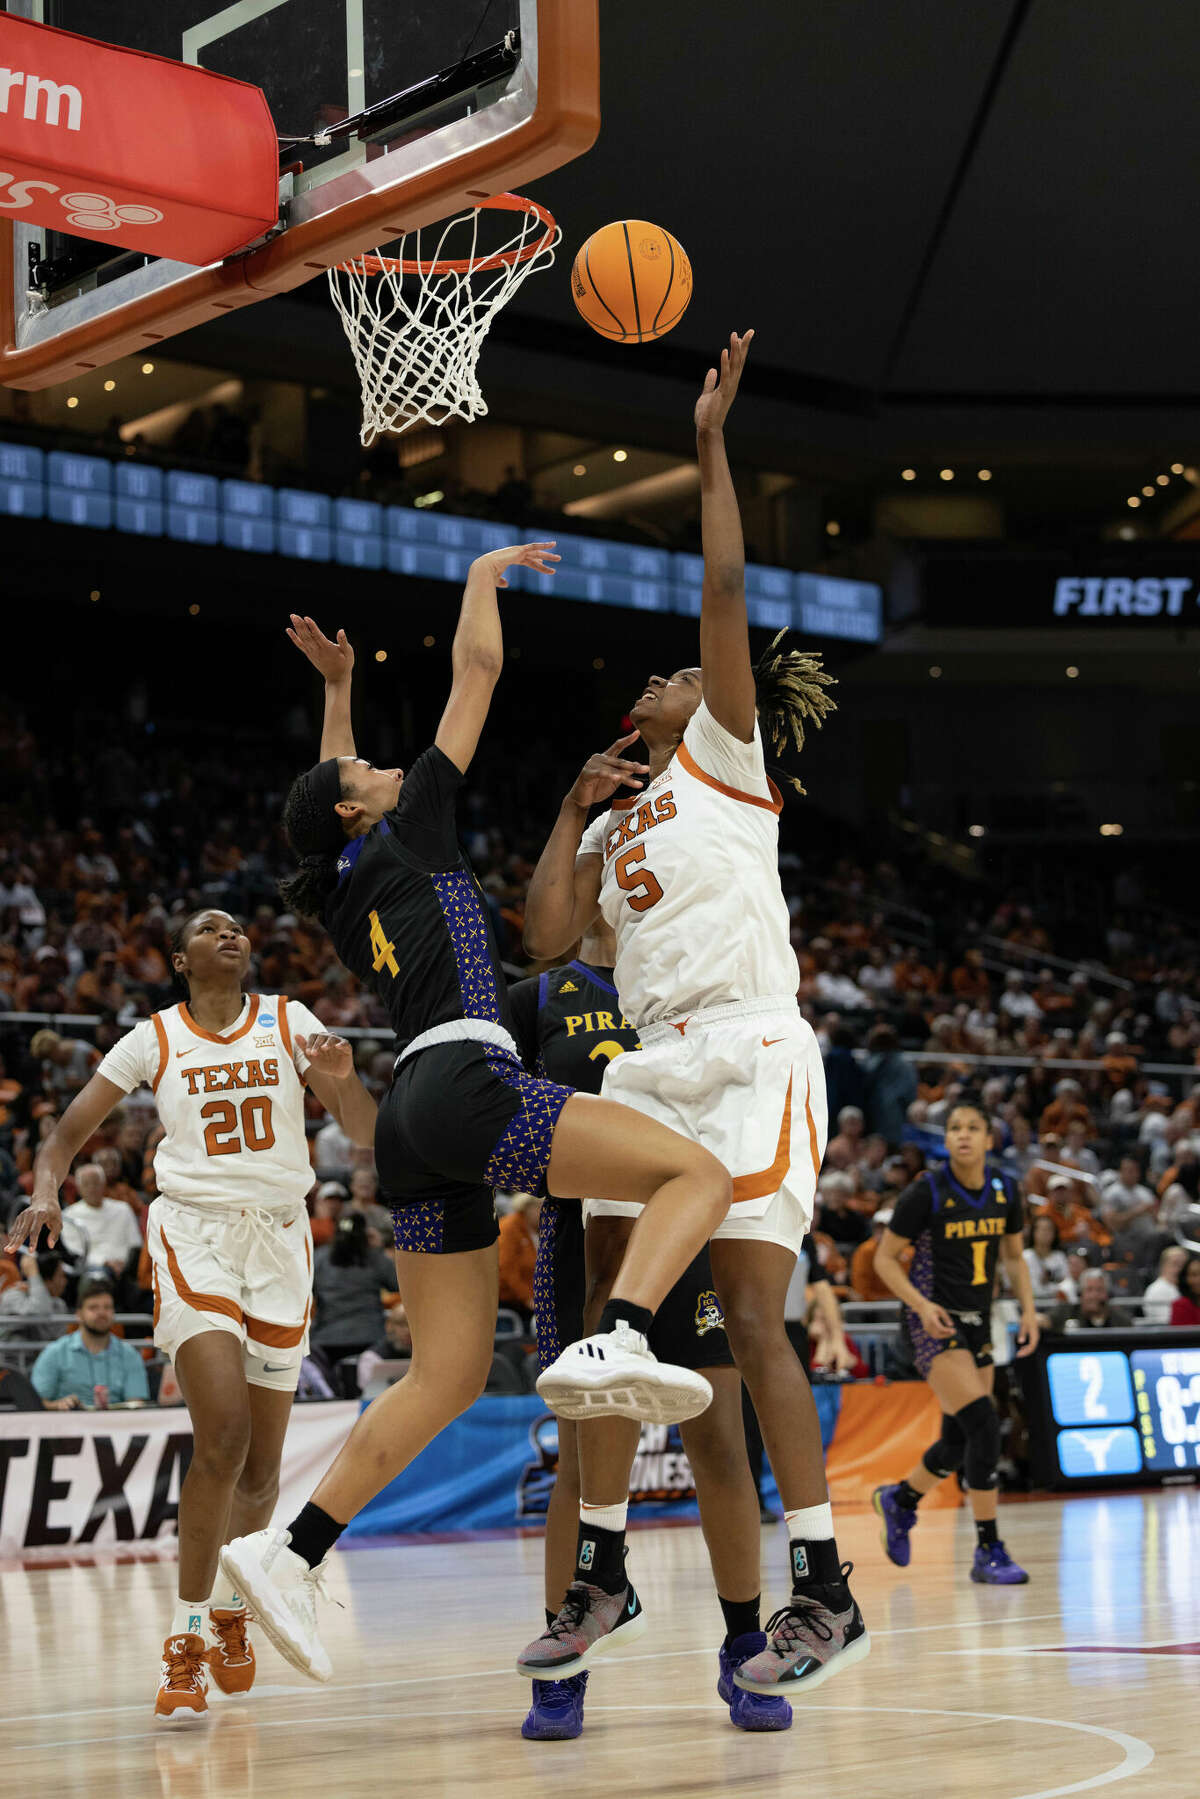 The Texas women's basketball team beat East Carolina on Saturday to advance to the second round of the NCAA Tournament.